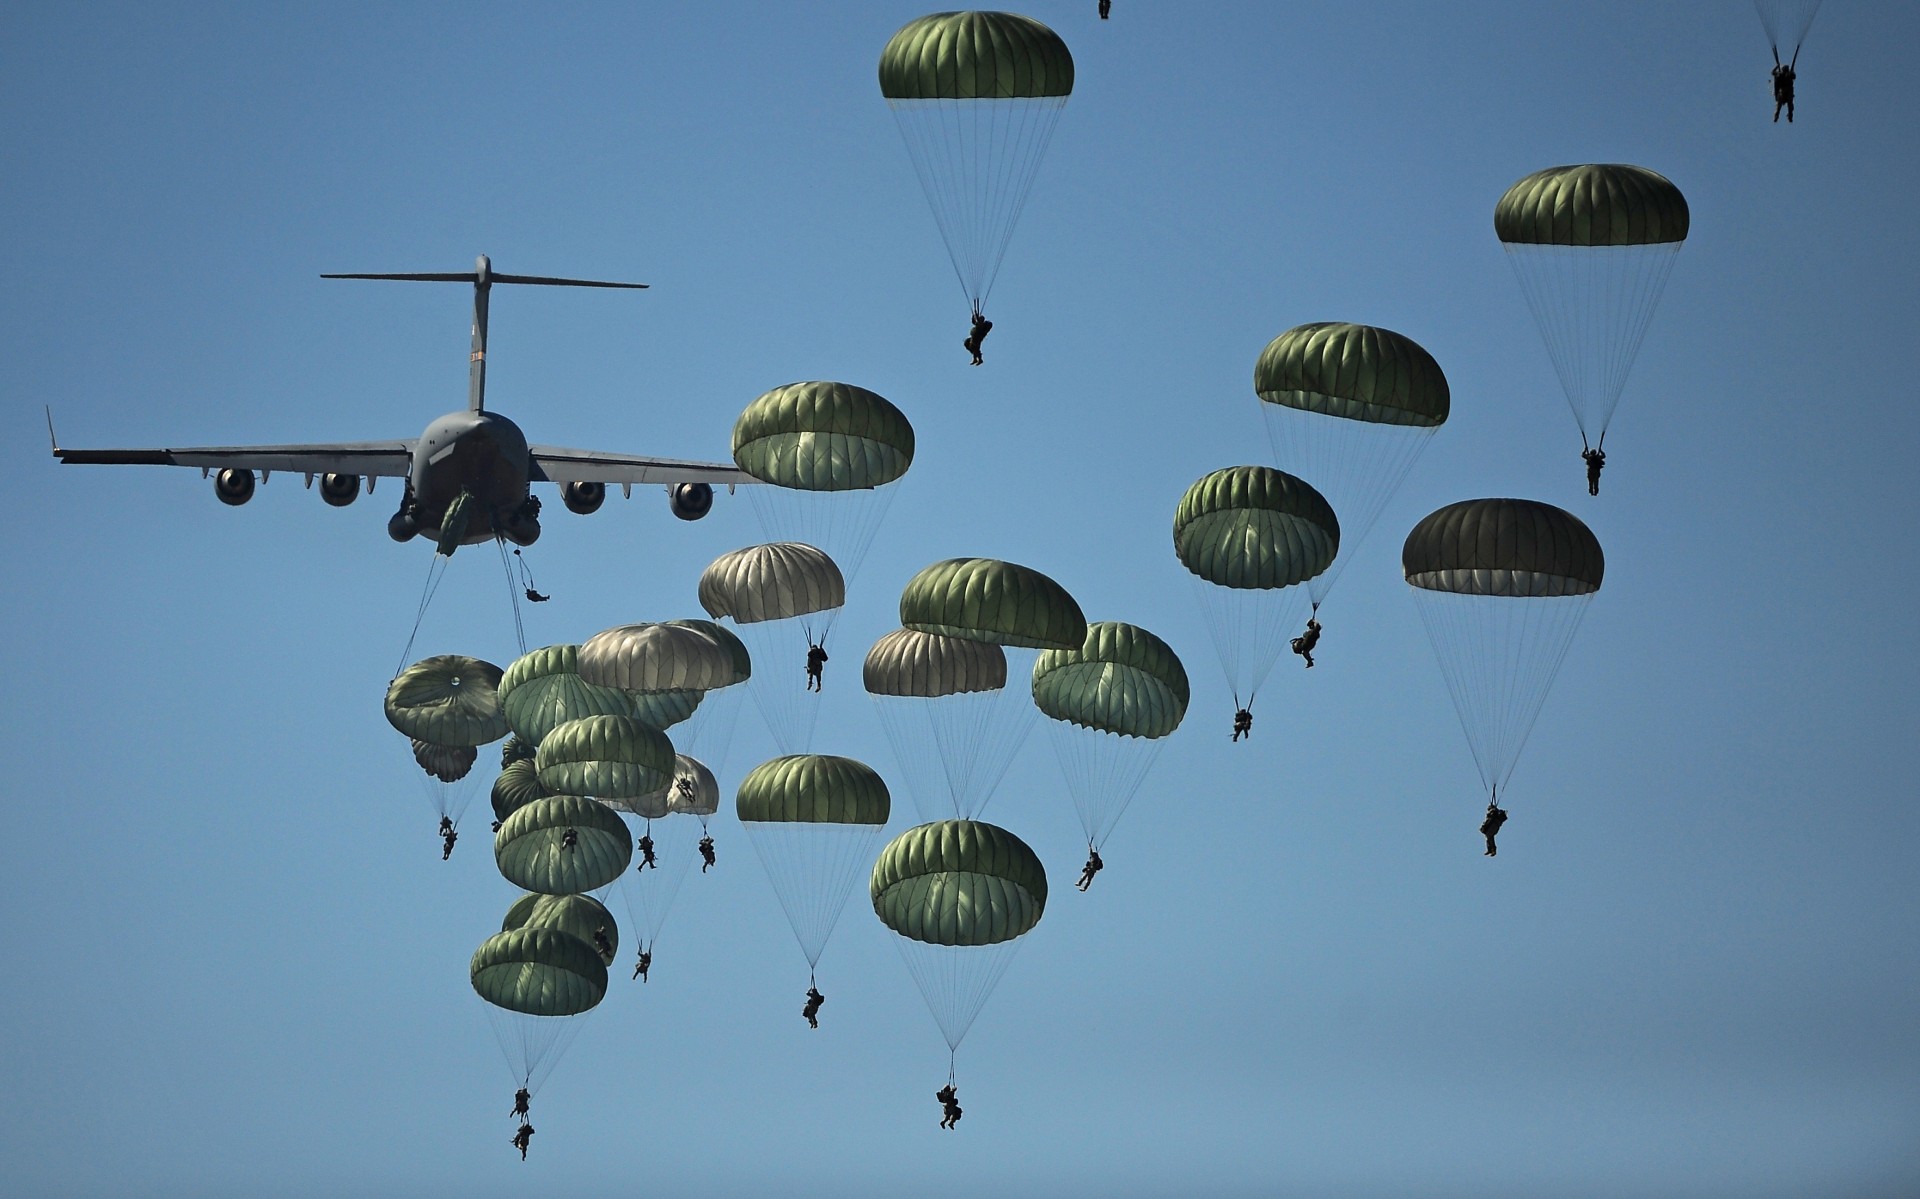 Origins and history of the parachute